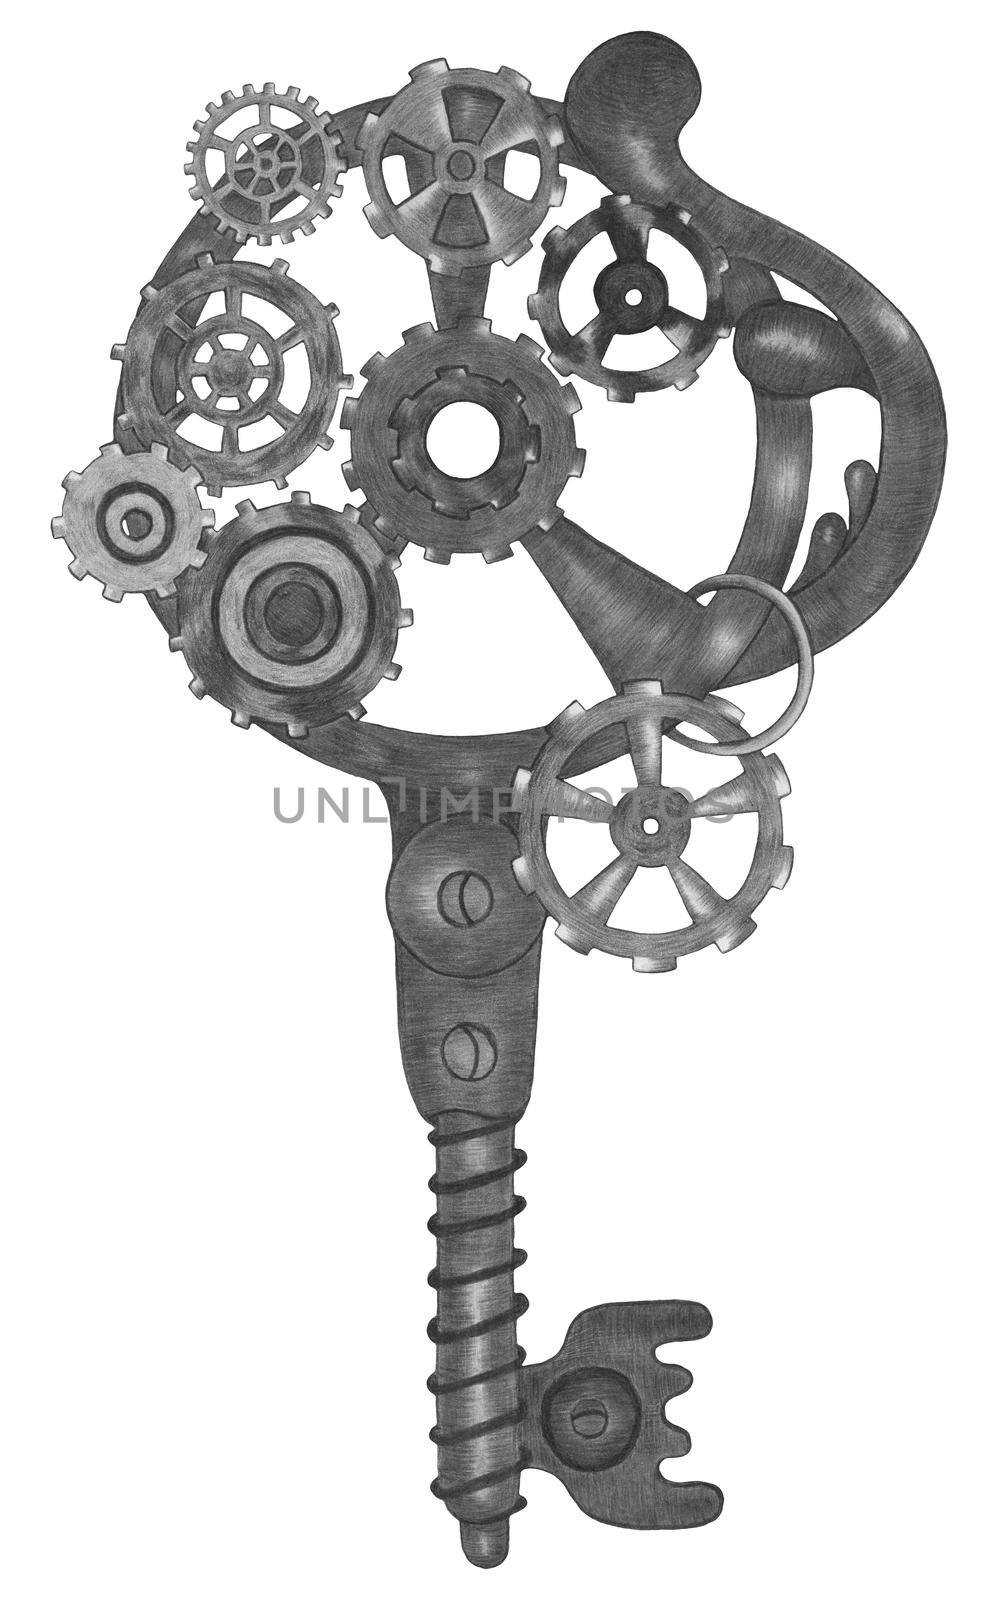 Hand Drawn Illustration of Colorful Steampunk Key in Gray Colors on White Background. Steampunk Key Design Element Drawn by Color Pencils.